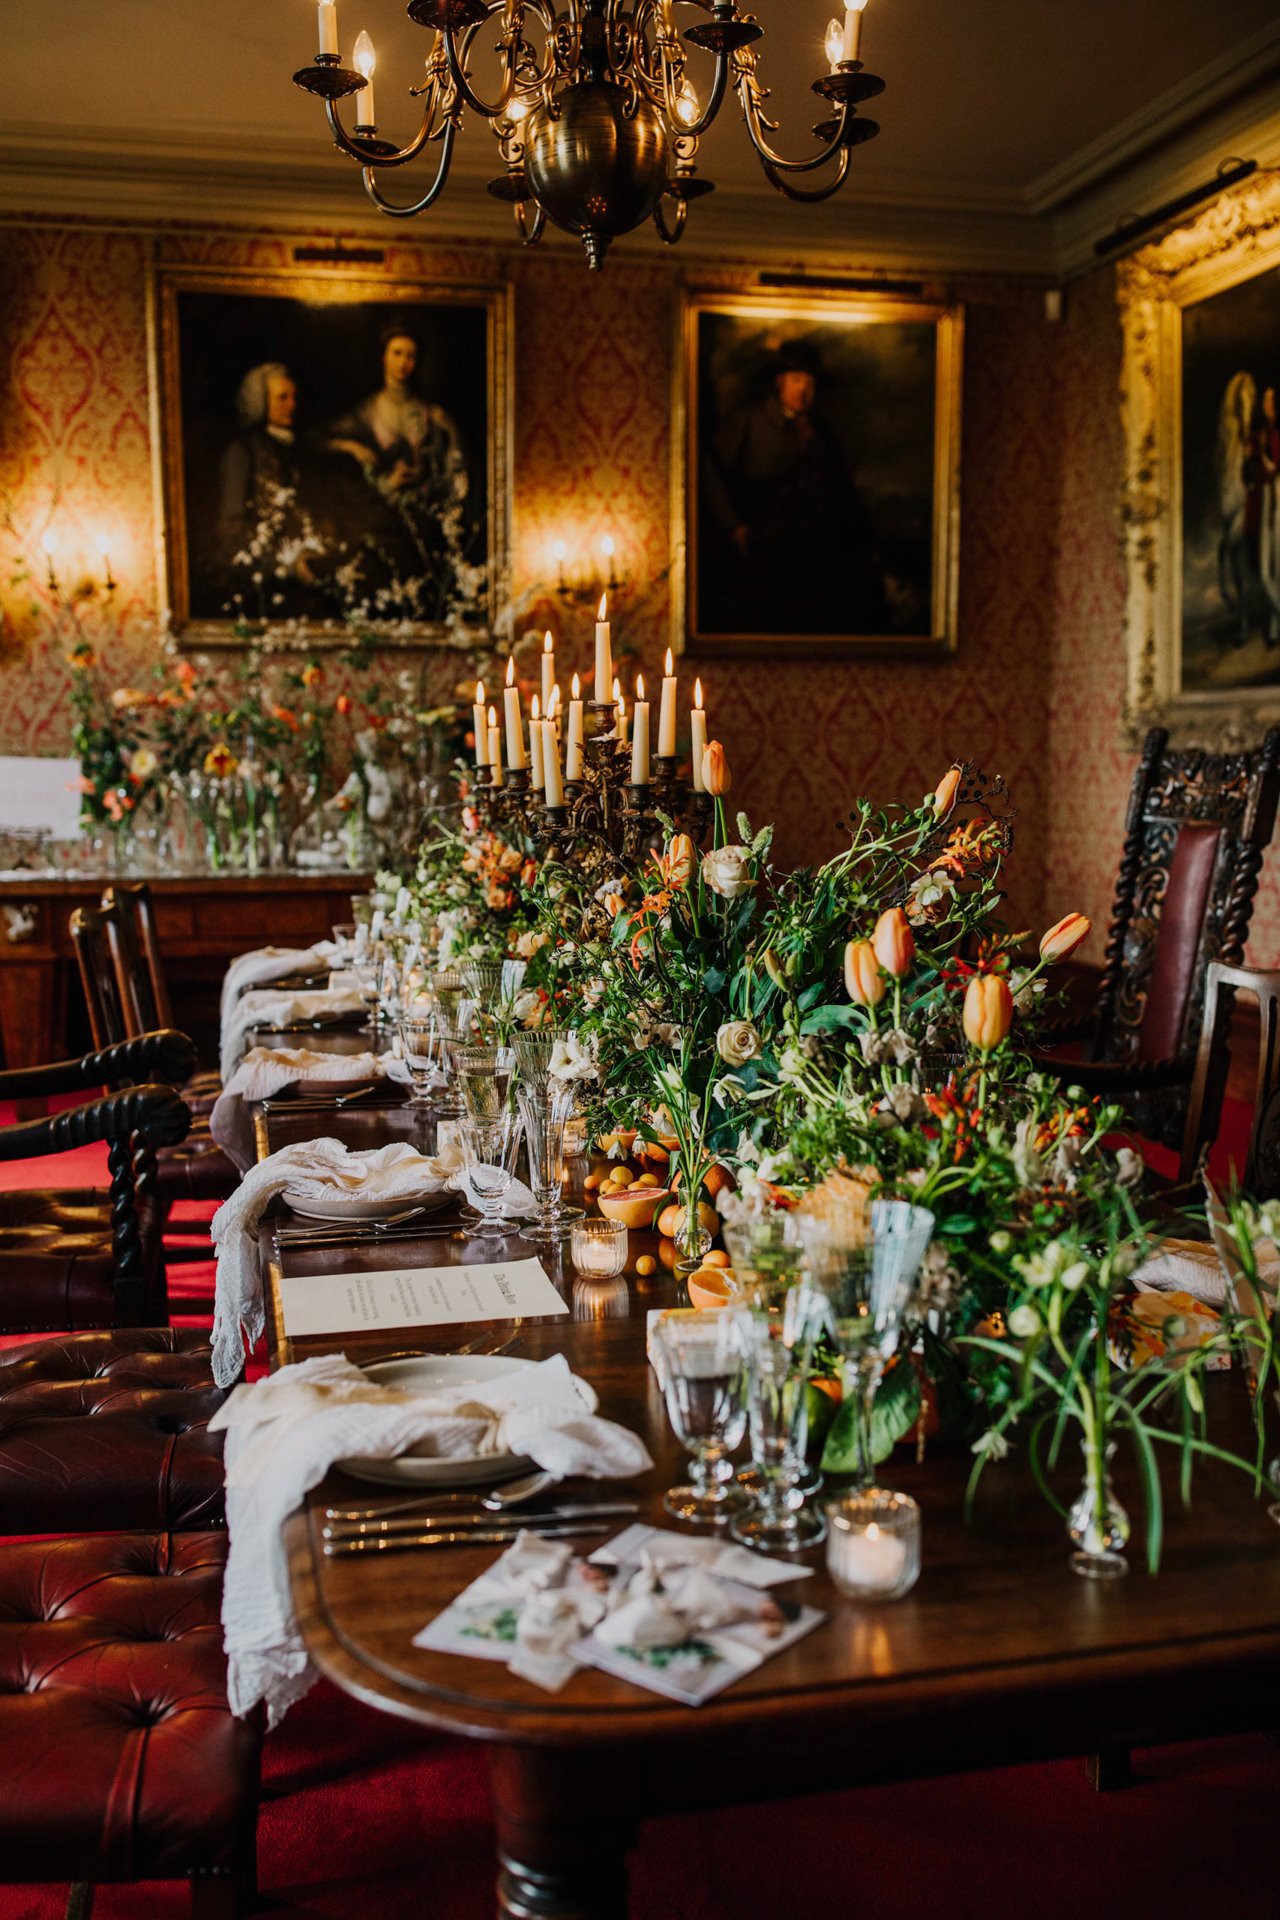 Old dining room in stately home decorated with modern luscious spring flowers, greenery and candelabras for wedding fair open day in march